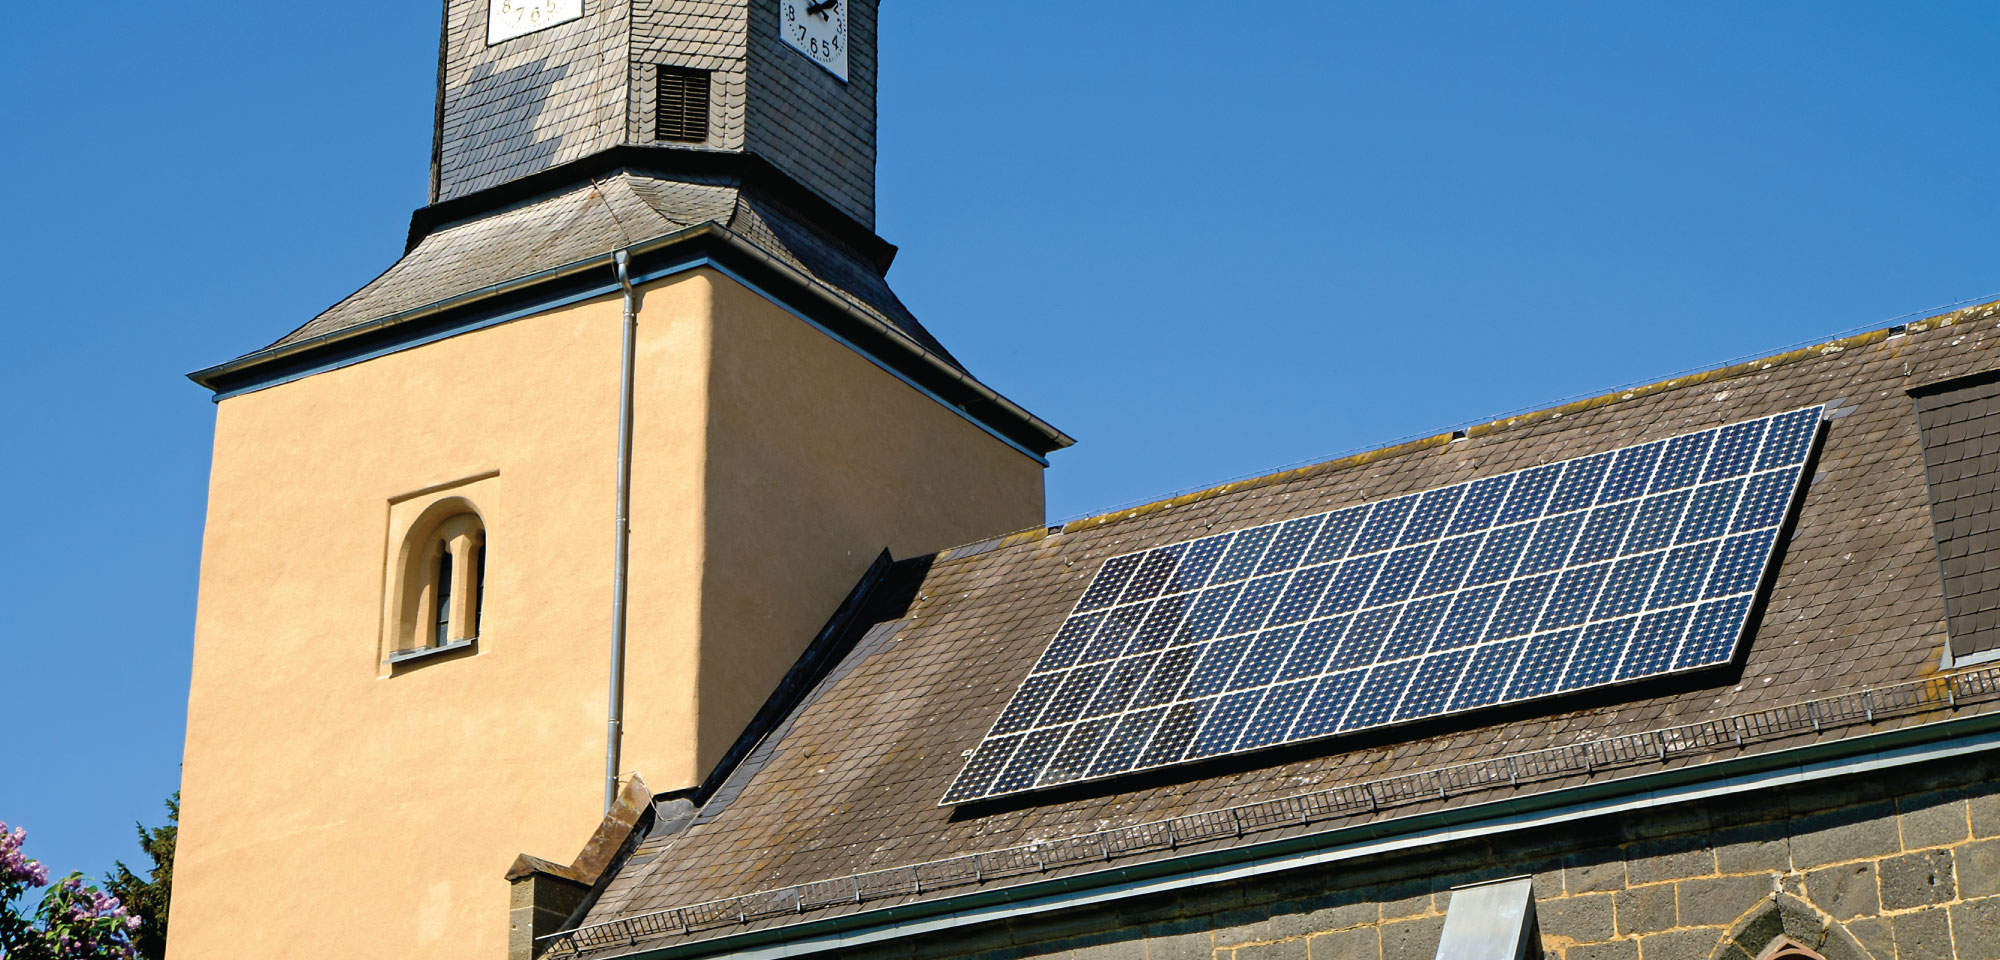 What are the benefits of solar power for churches?